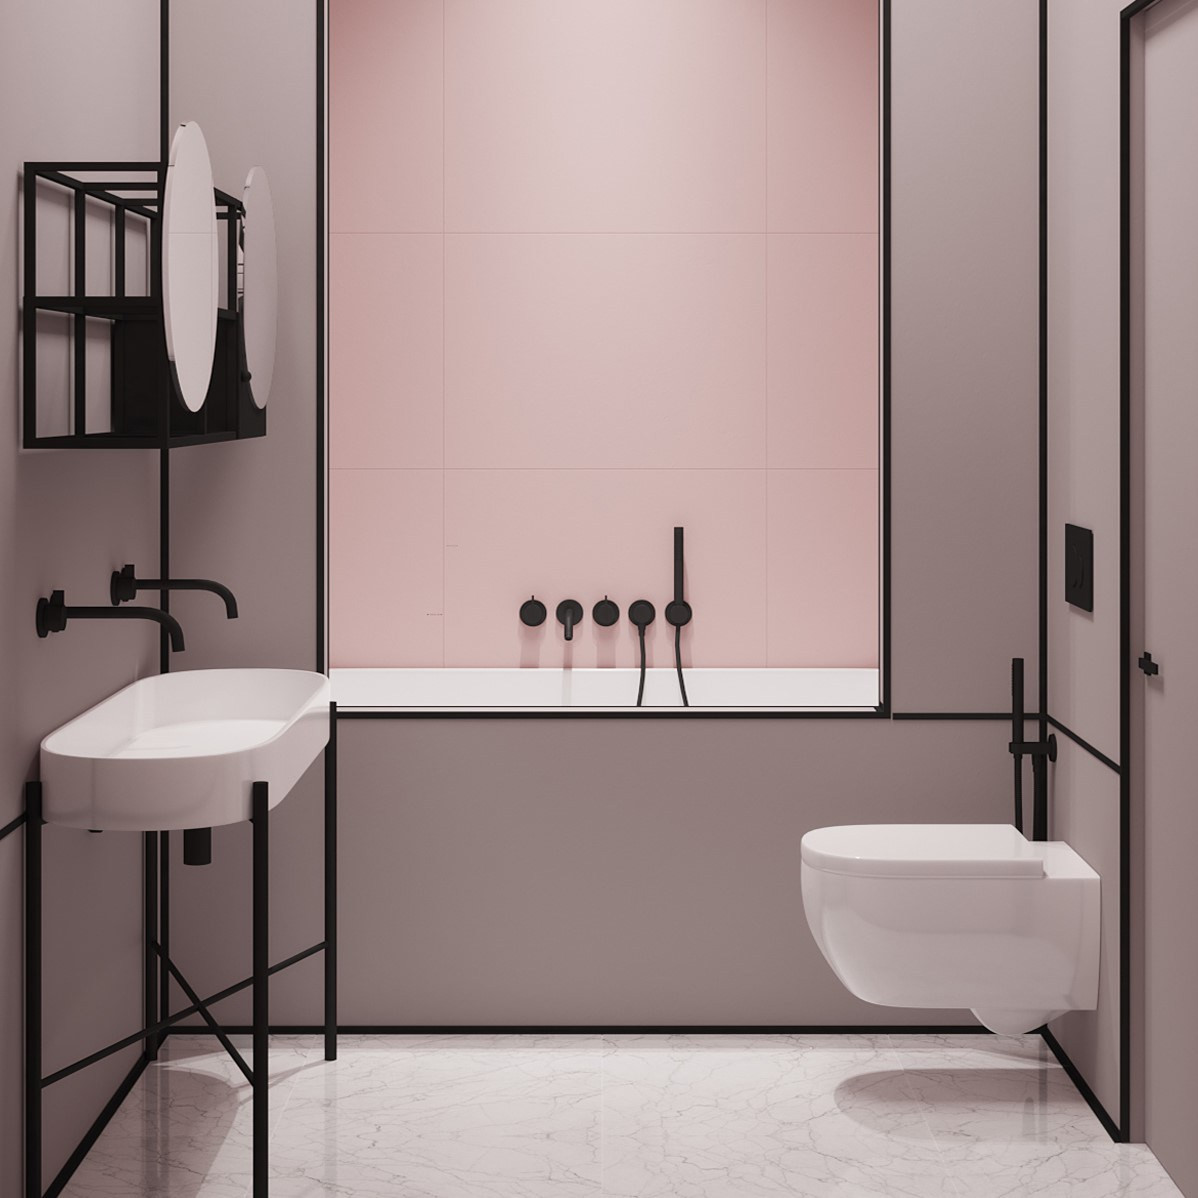 Popular Bathroom Colors 2020
 Designs Colors and Tiles Ideas 8 Bathroom trends for 2020